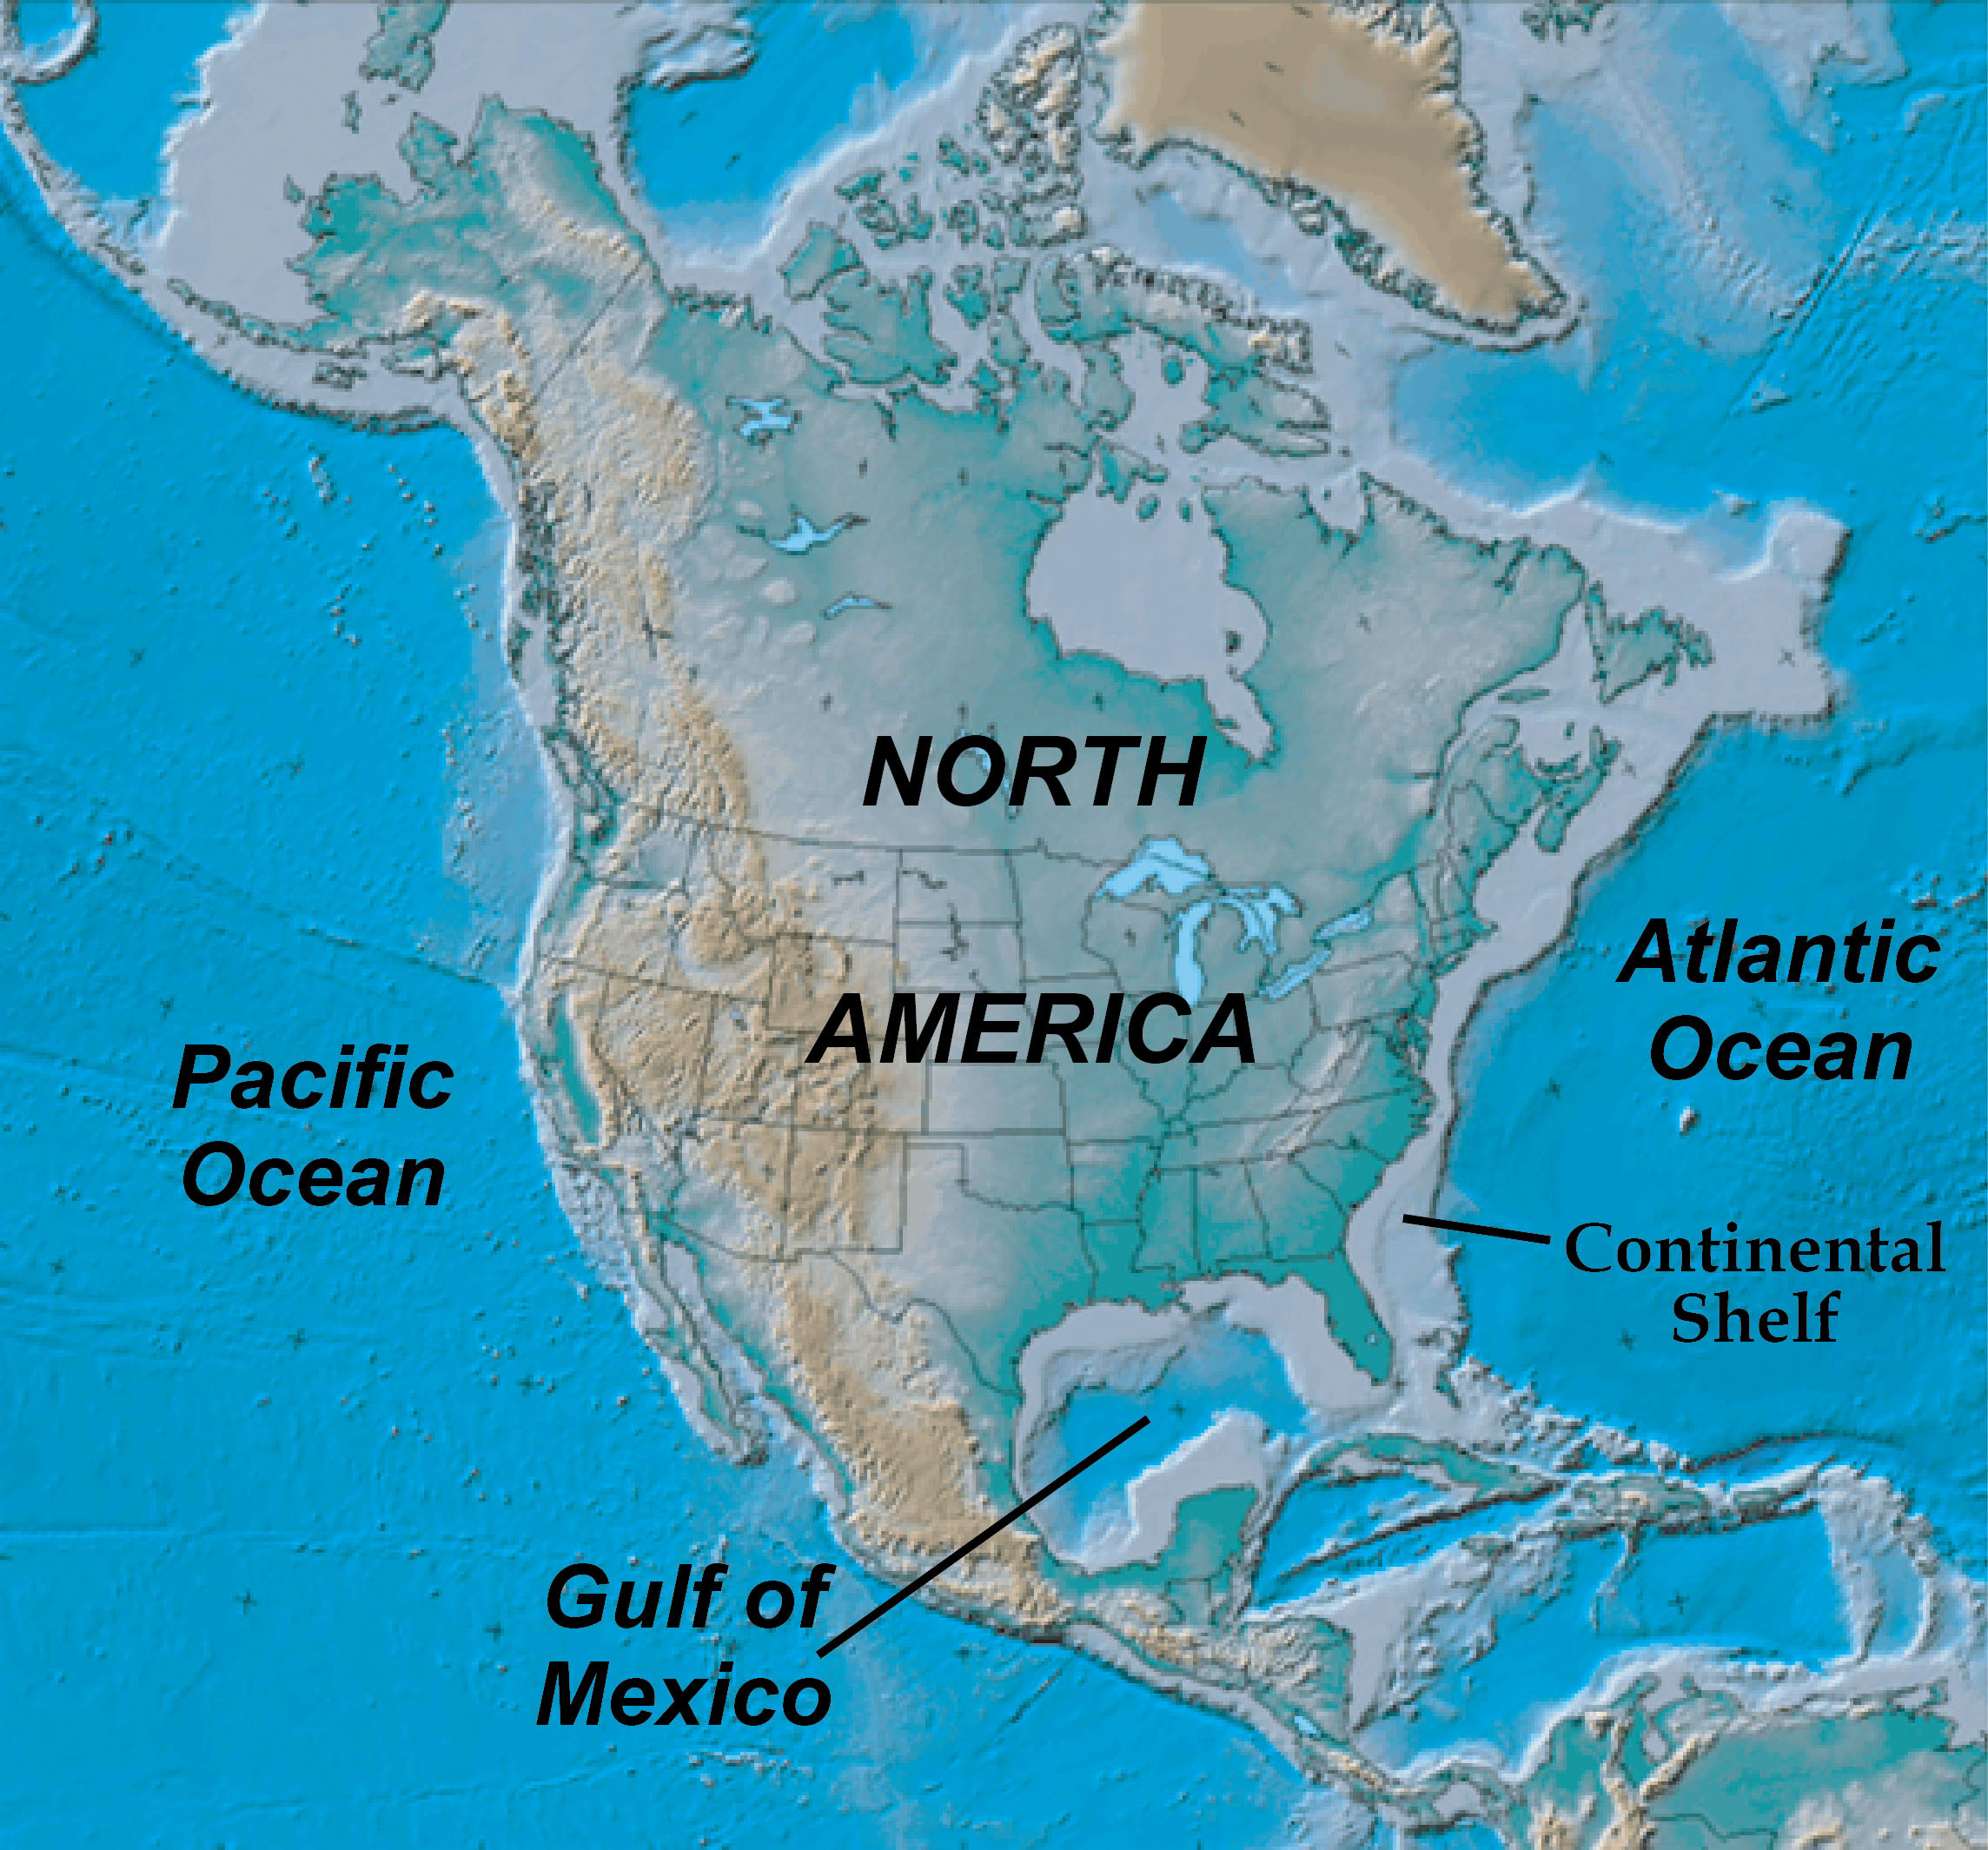 Shaded Relief Map of North America and Continental Shelf